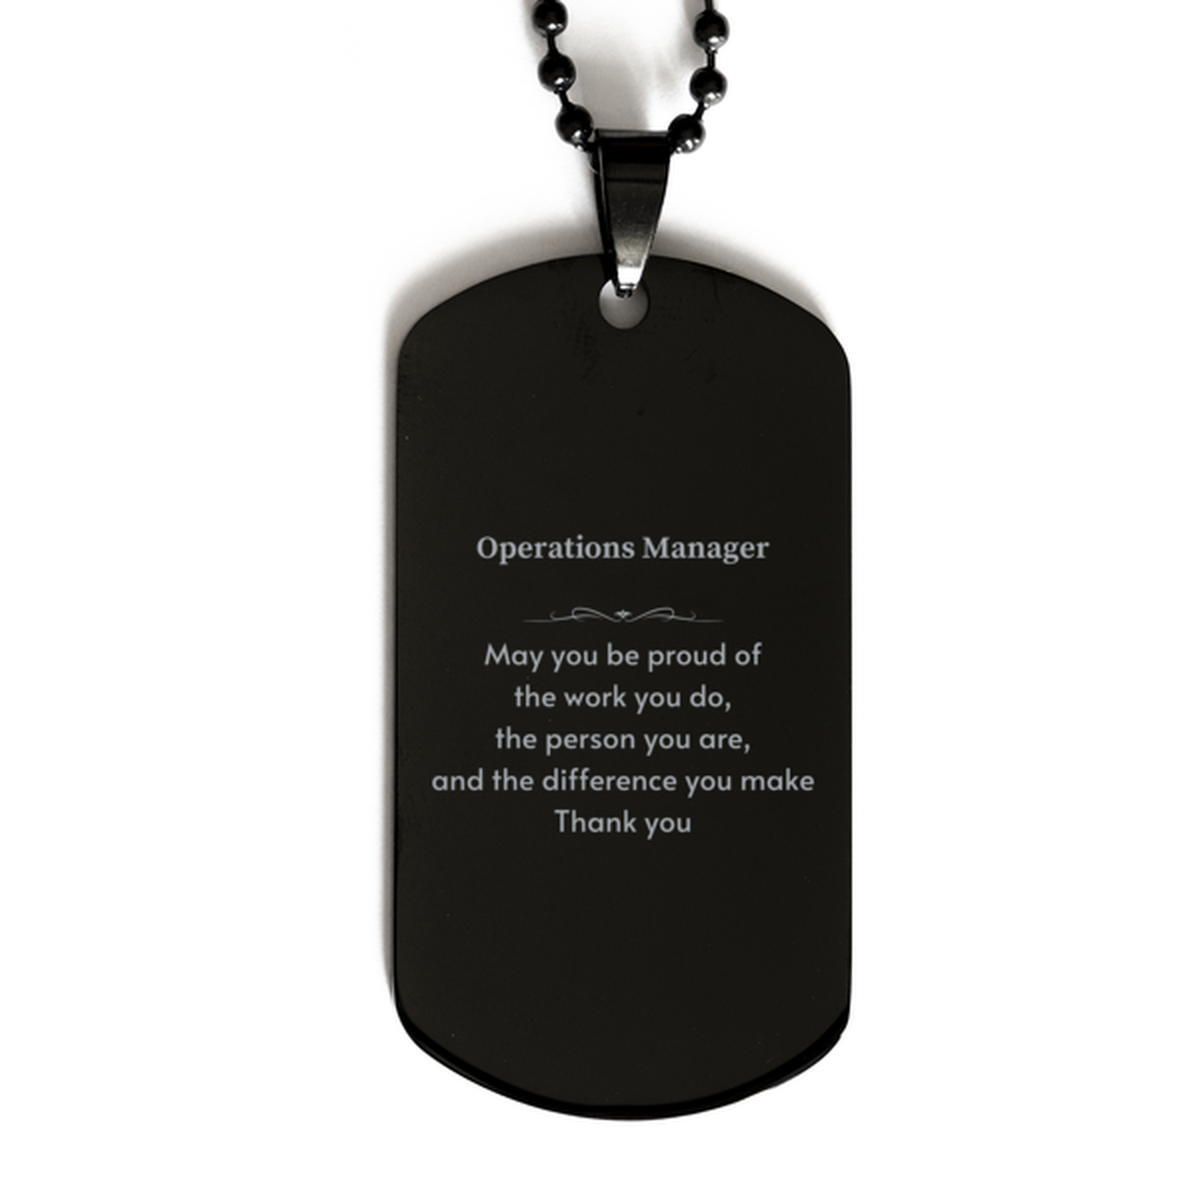 Heartwarming Black Dog Tag Retirement Coworkers Gifts for Operations Manager, Operations Manager May You be proud of the work you do, the person you are Gifts for Boss Men Women Friends